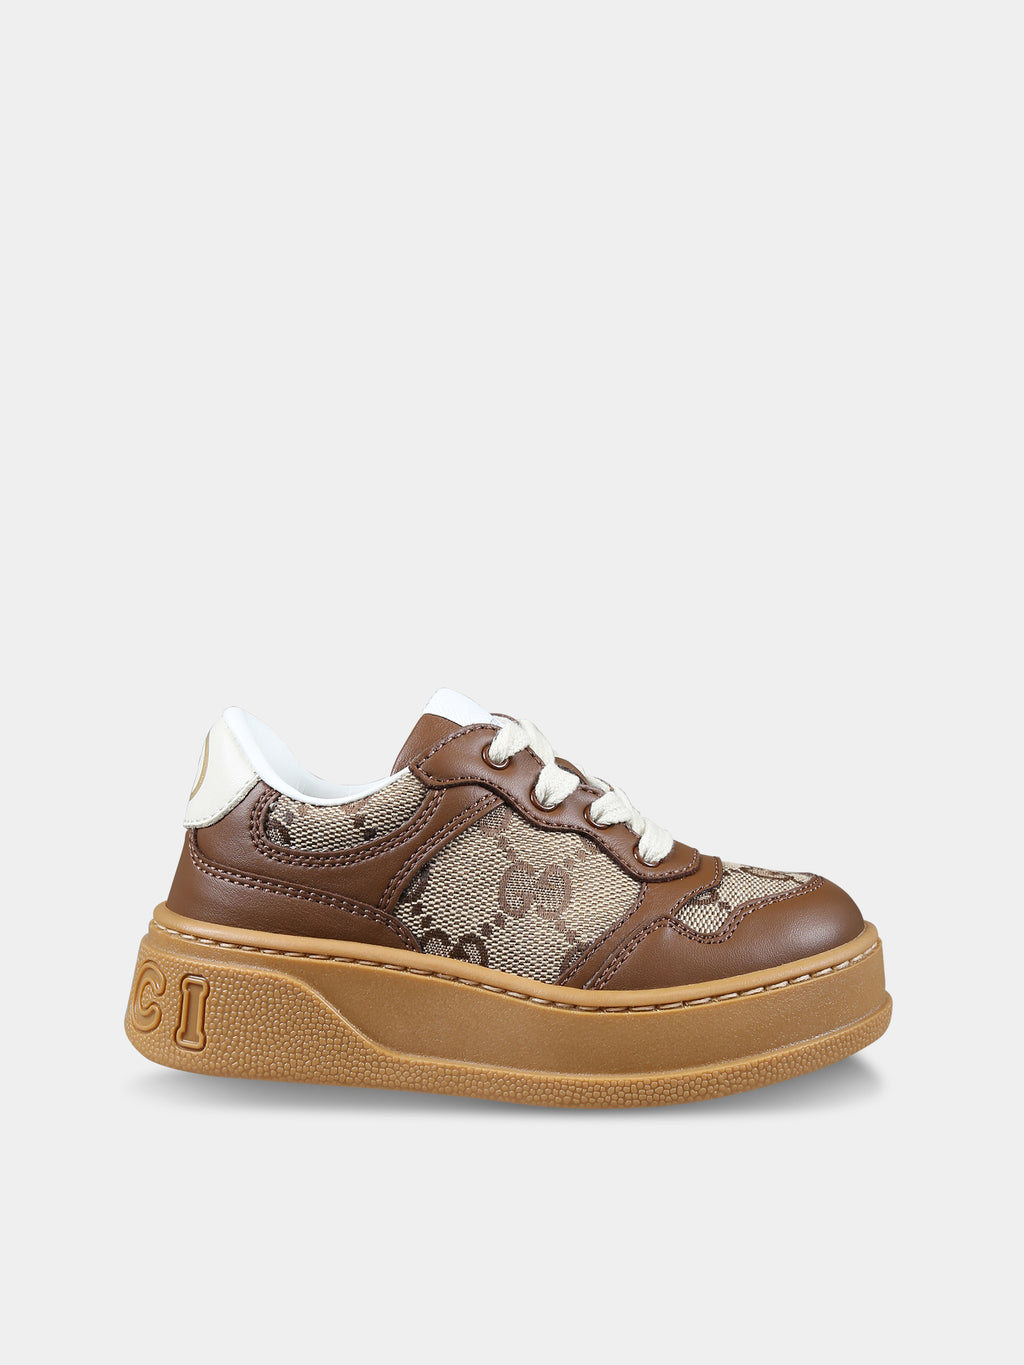 Brown sneakers for kids with iconic GG